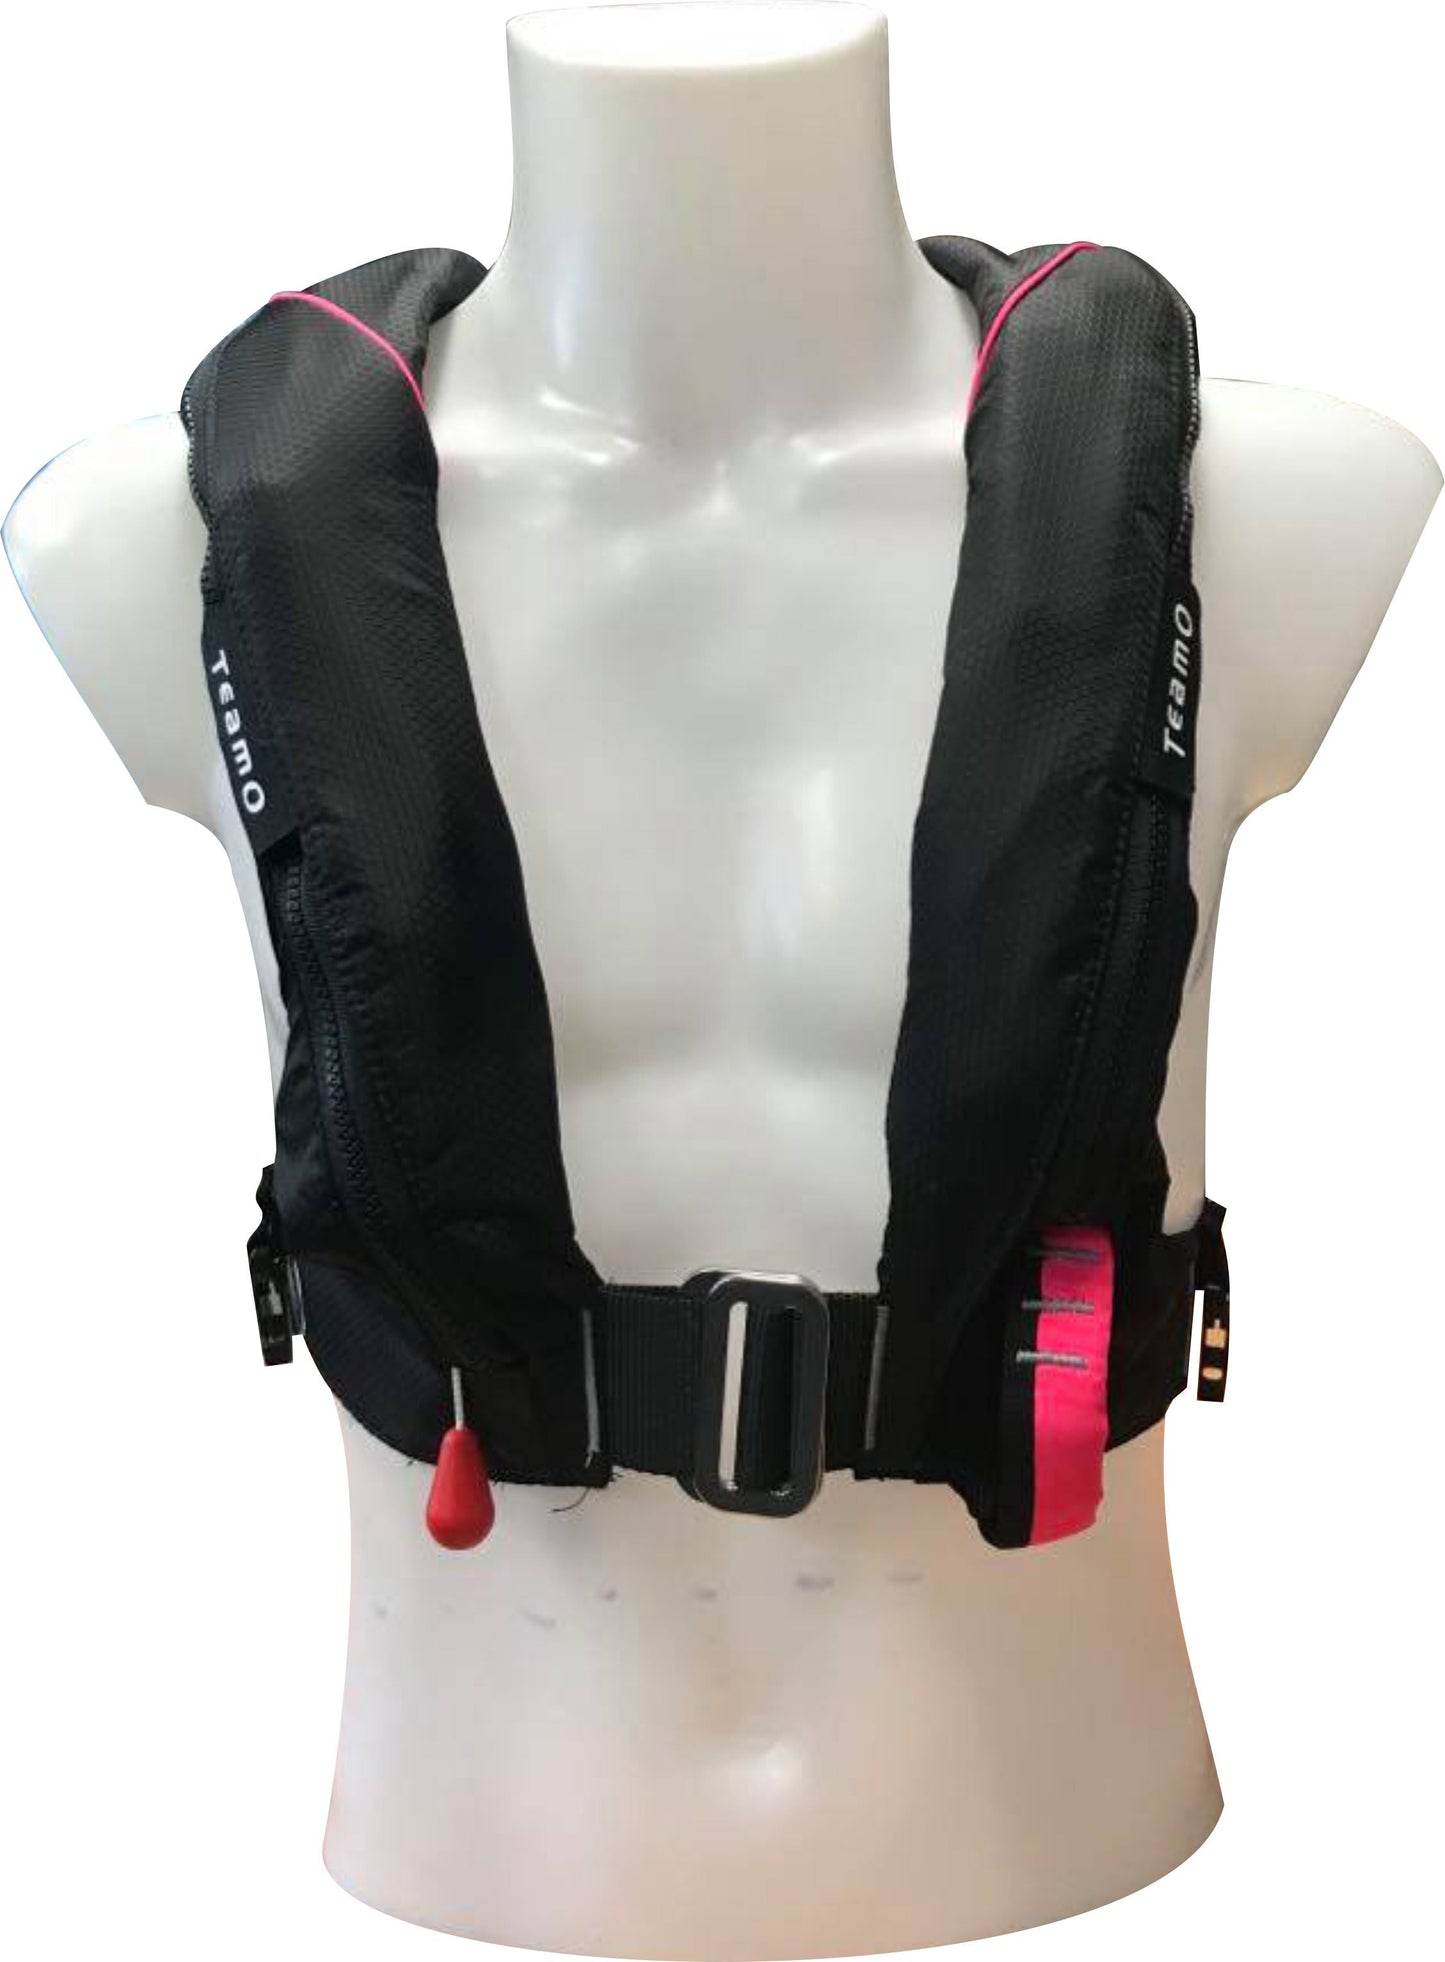 TeamO Coastal Inflatable PFD in Black with Pink 